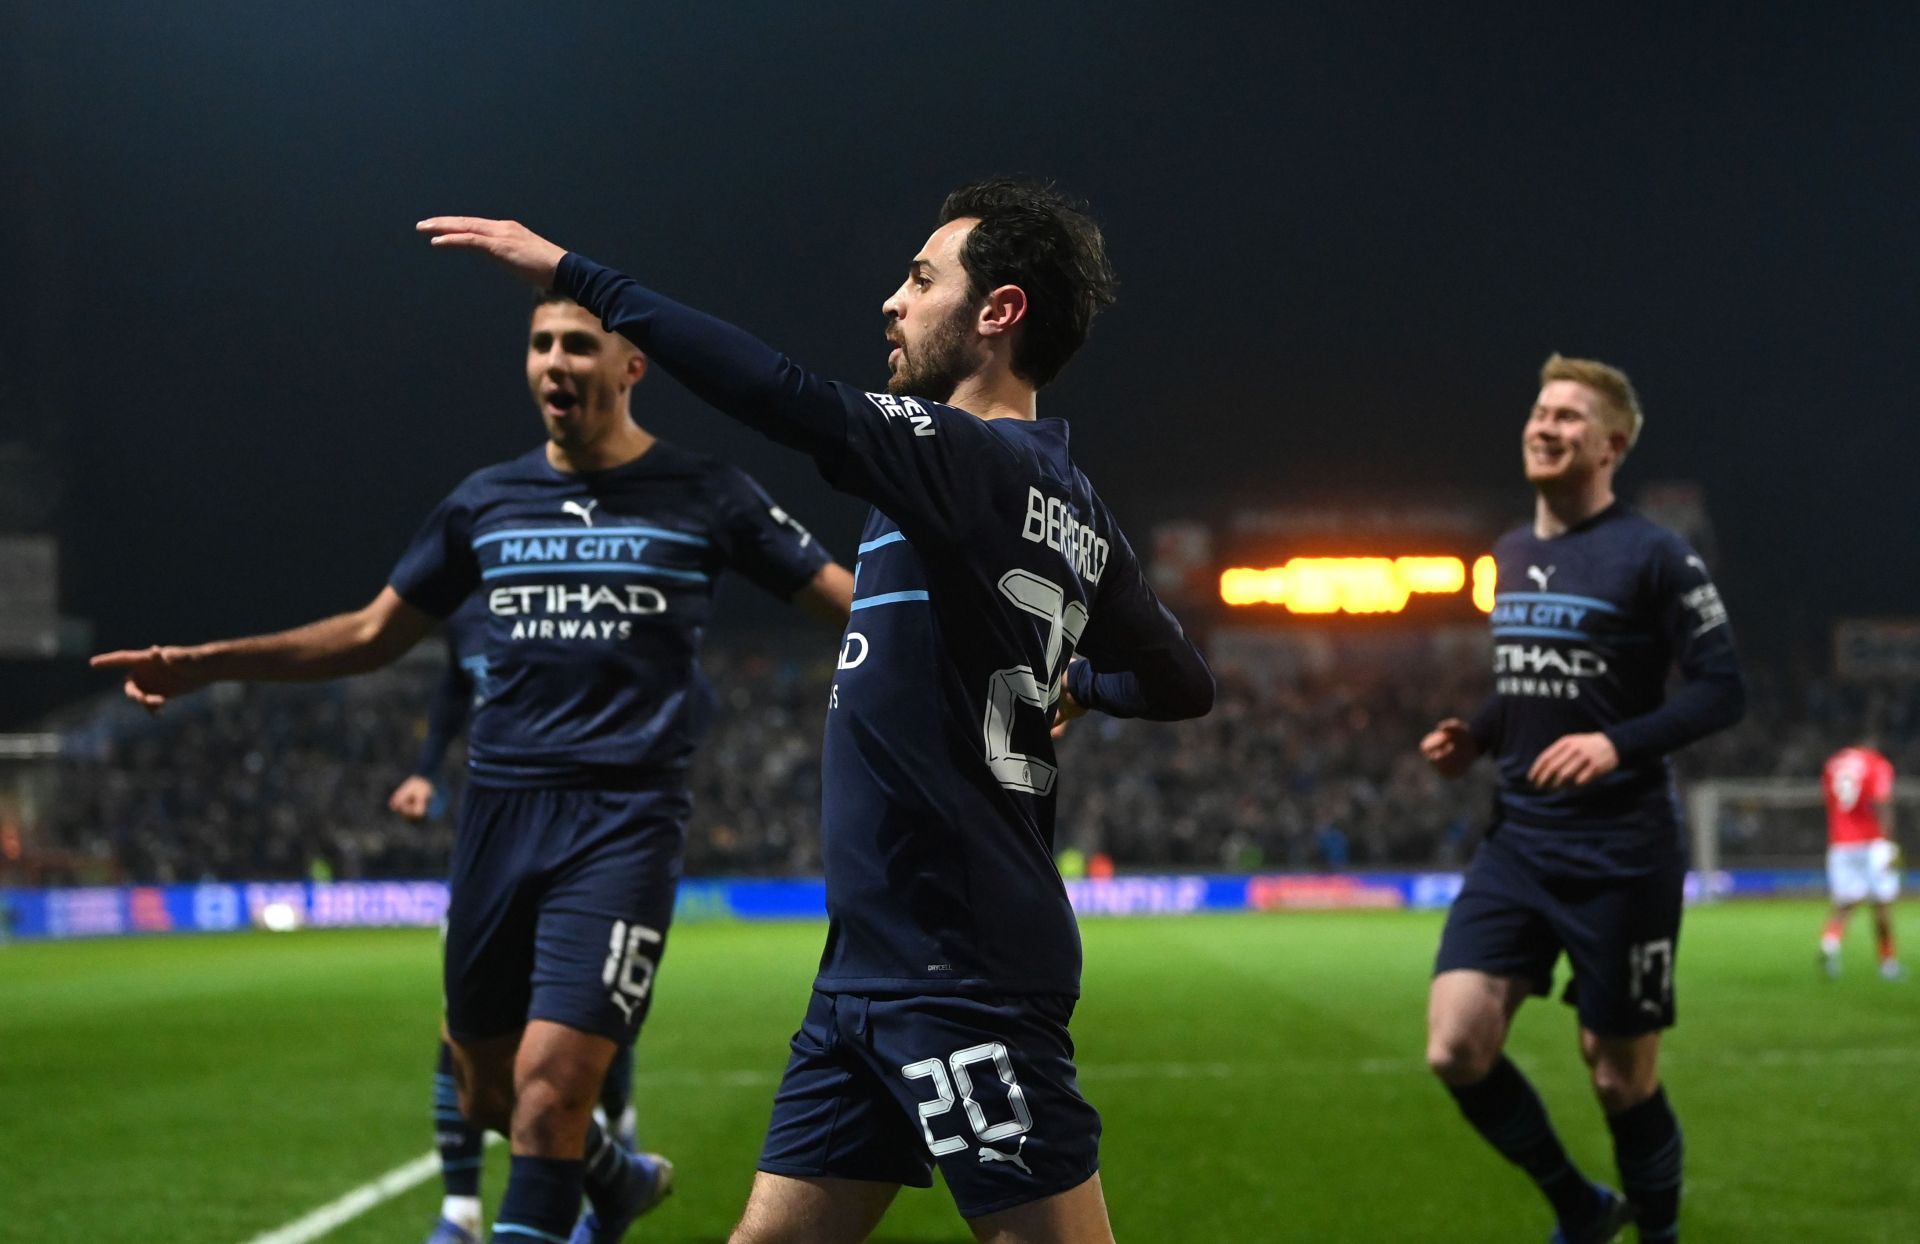 Manchester City have been in stunning form recently